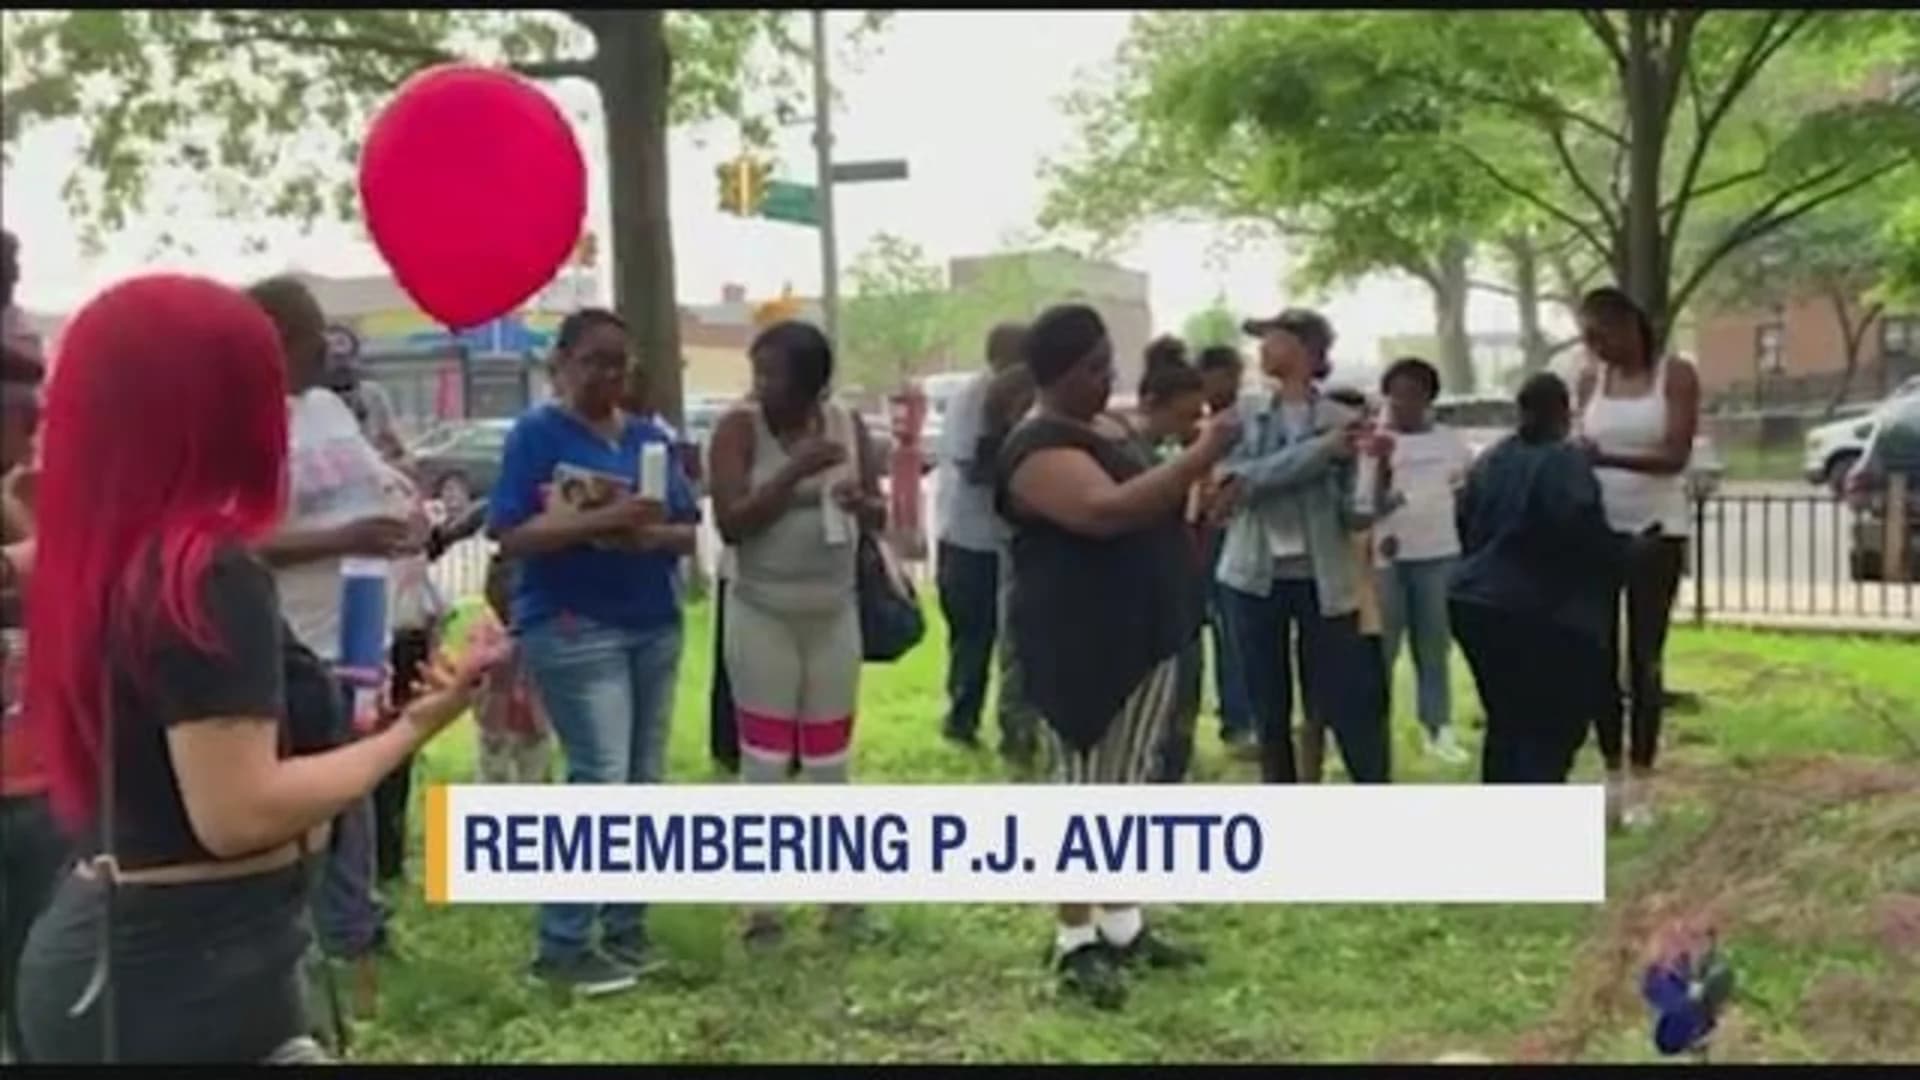 Friends and family gather to remember slain 6-year-old